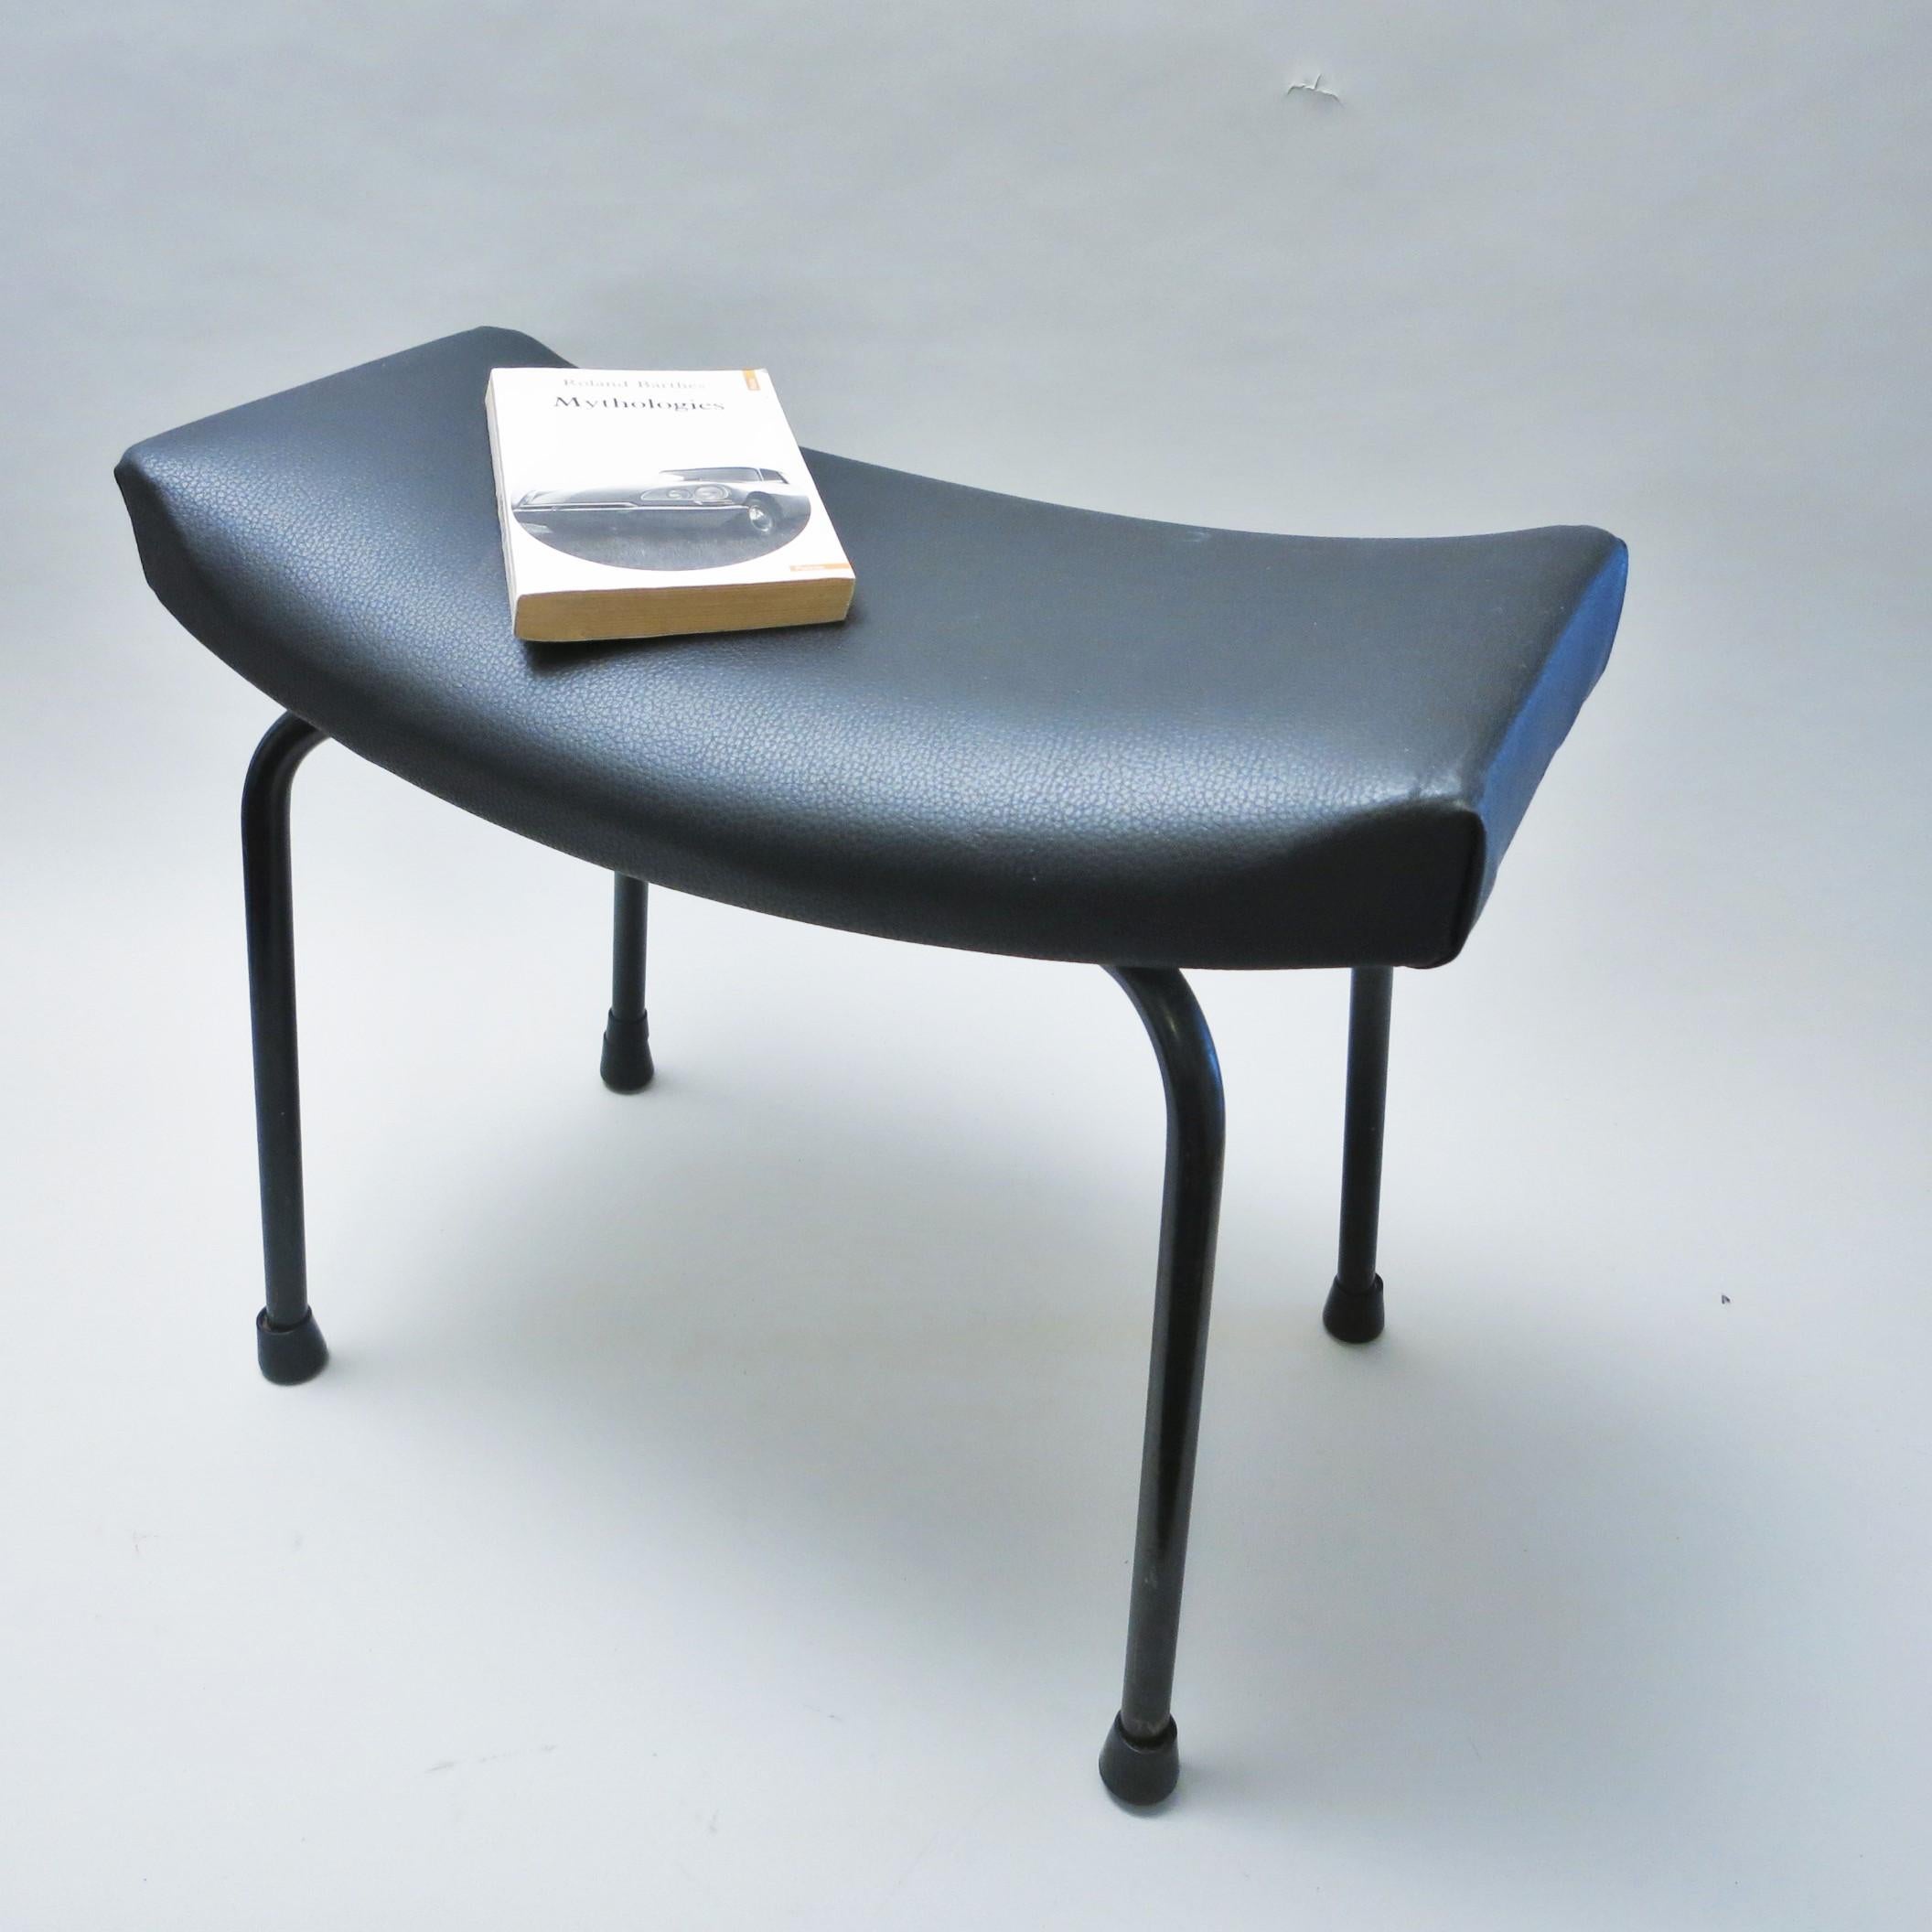 Metal French Mid-Century Modern Stool Taureau by Pierre Guariche, 1950s For Sale